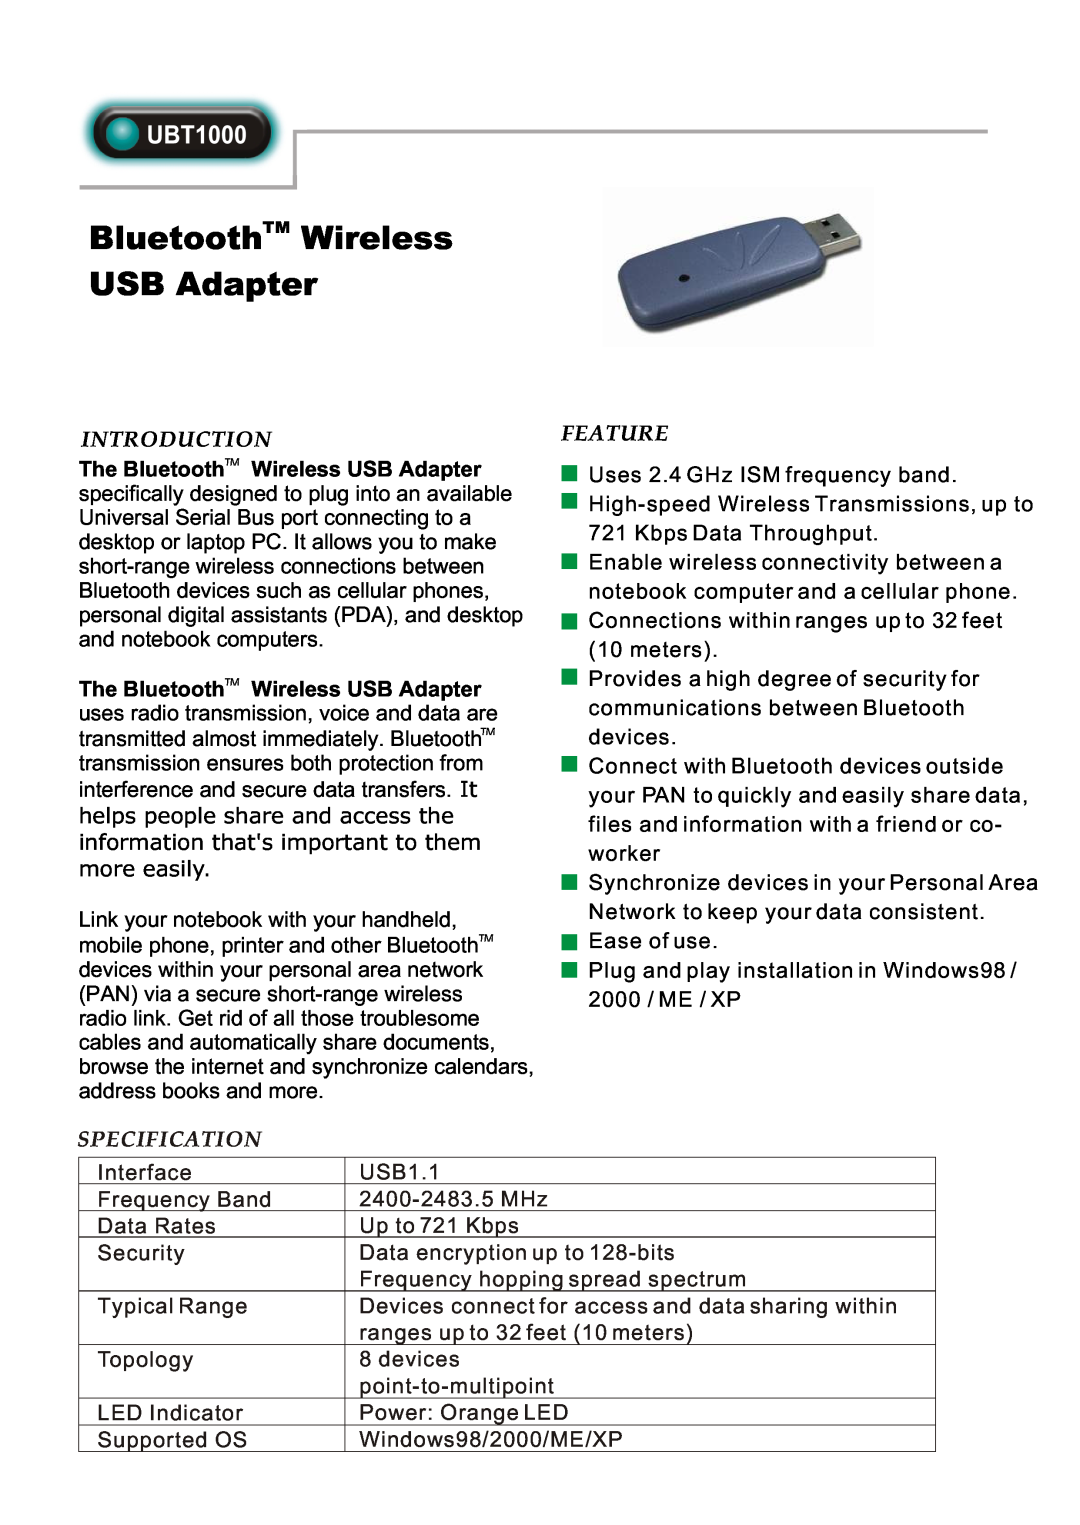 Abocom UBT1000 manual Introduction, The BluetoothTM Wireless USB Adapter, Specification, Feature 